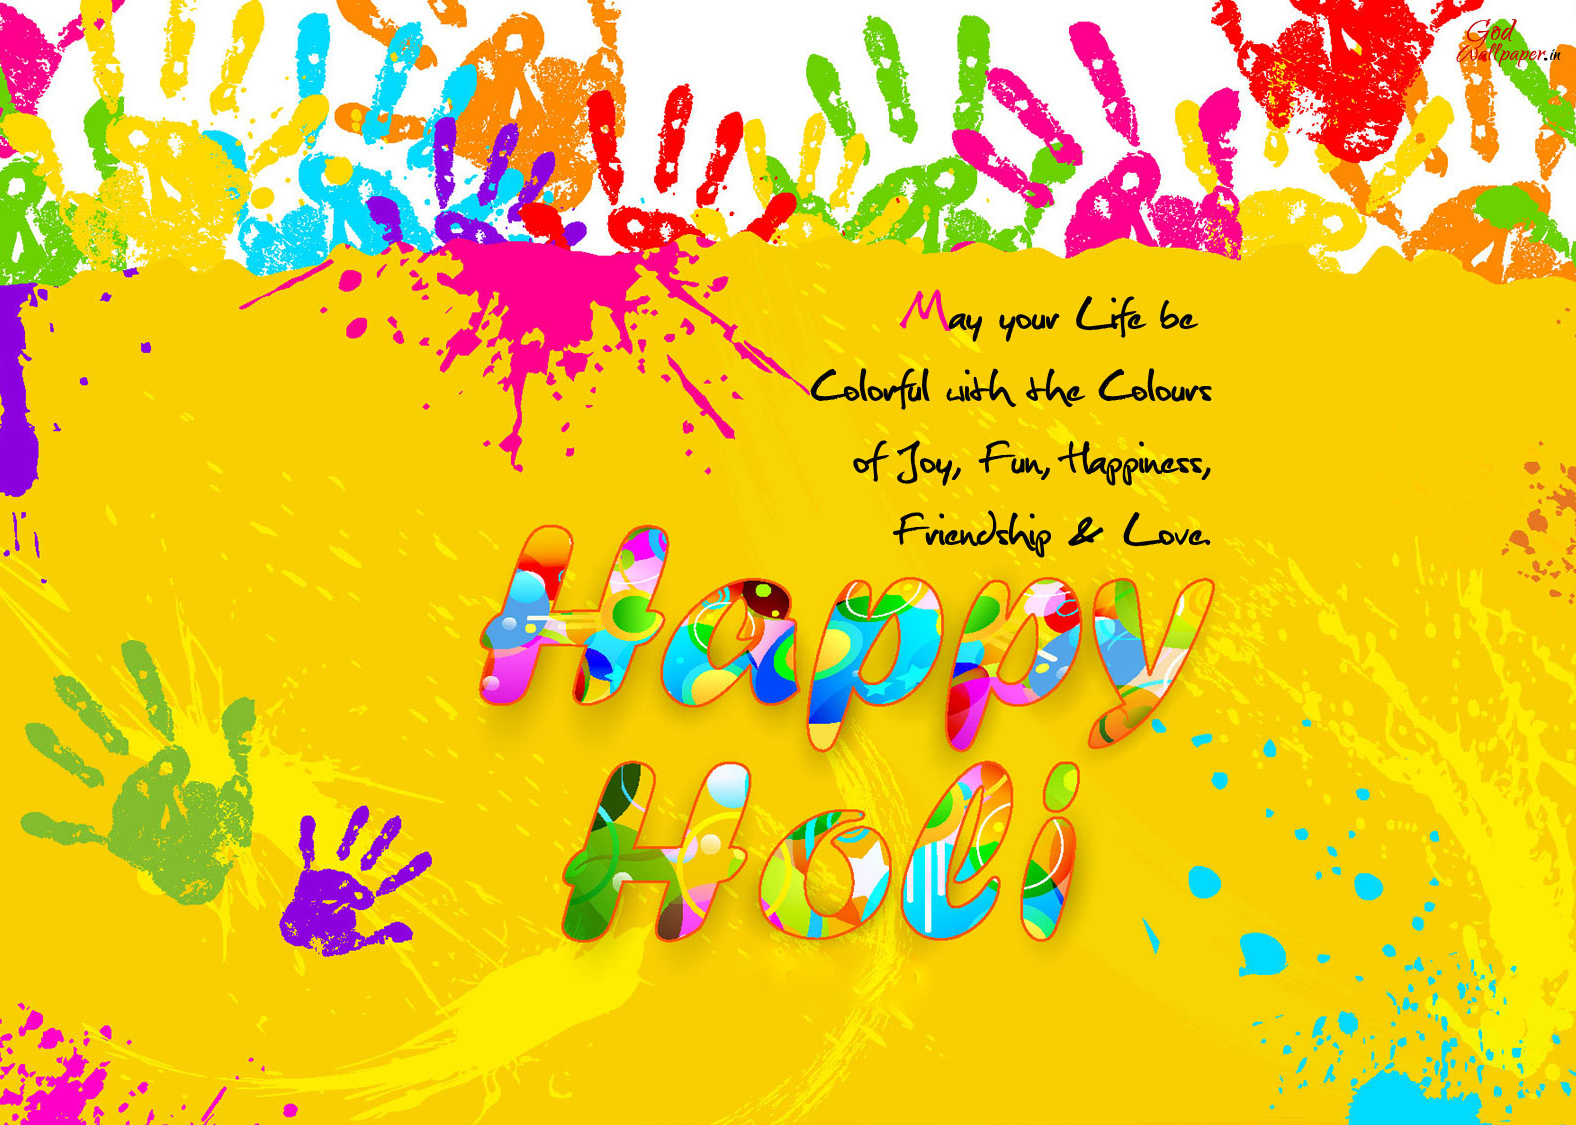 Happy Holi colour full Images with quotes 